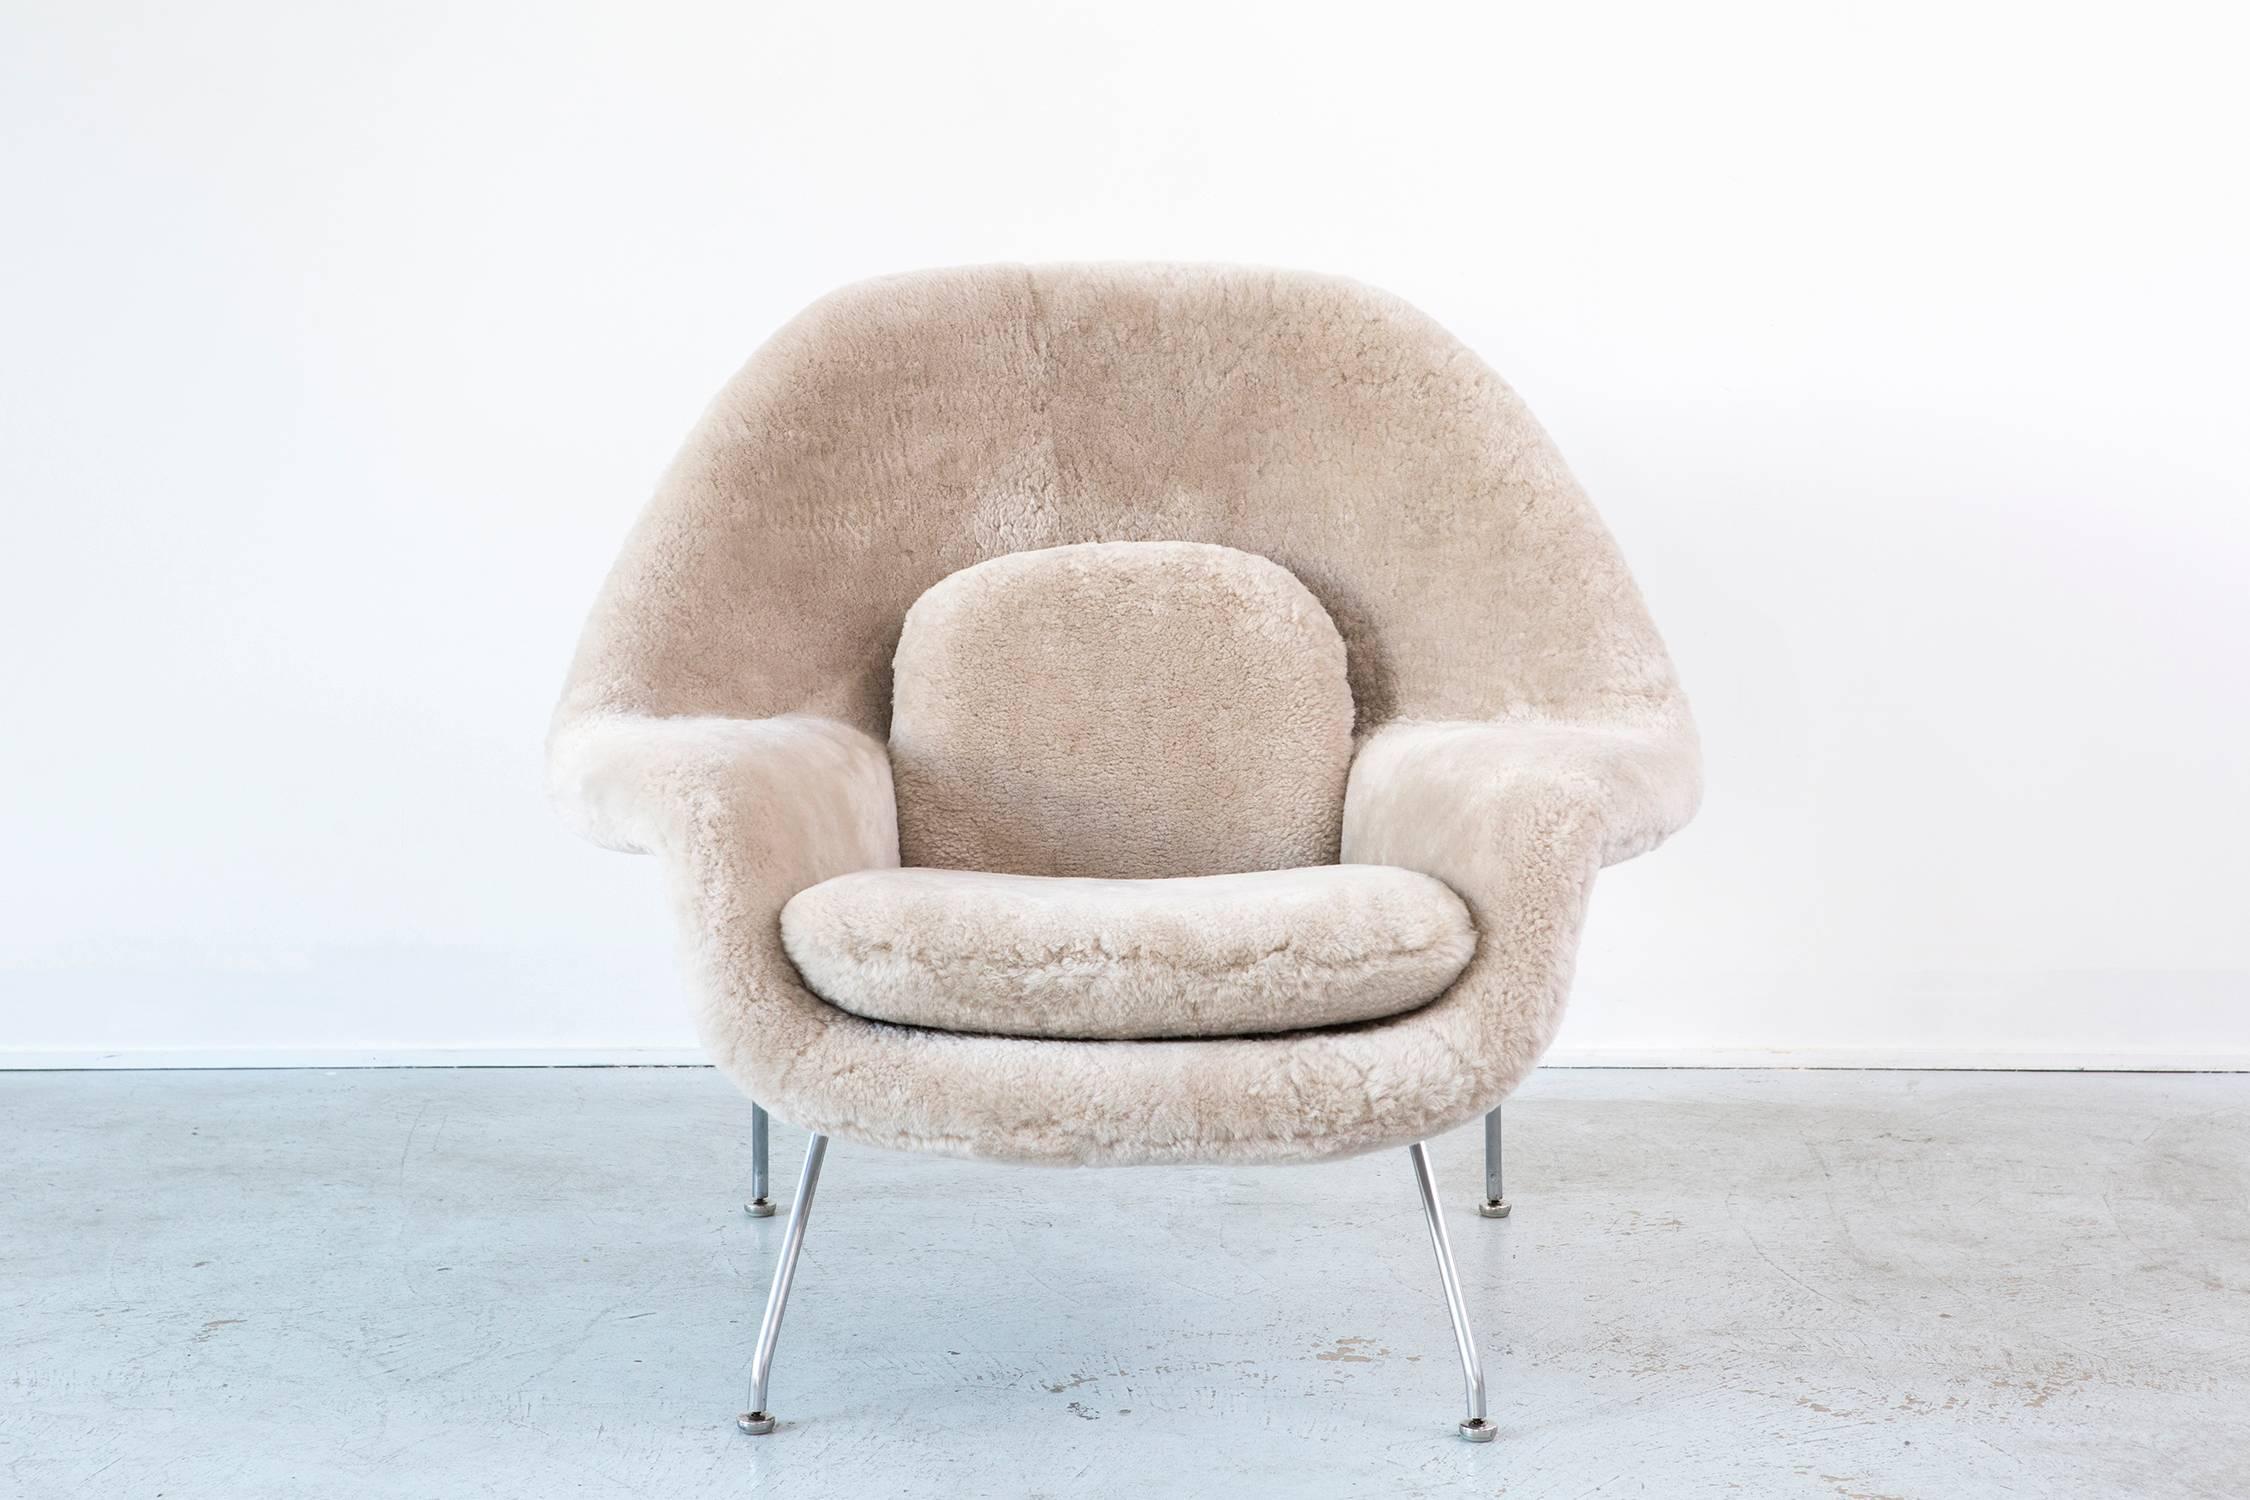 Womb chair

designed by Eero Saarinen for Knoll,

USA, d 1948 / circa 1960s.

Reupholstered in wool shearling and steel frame.

Measures: 35 ½